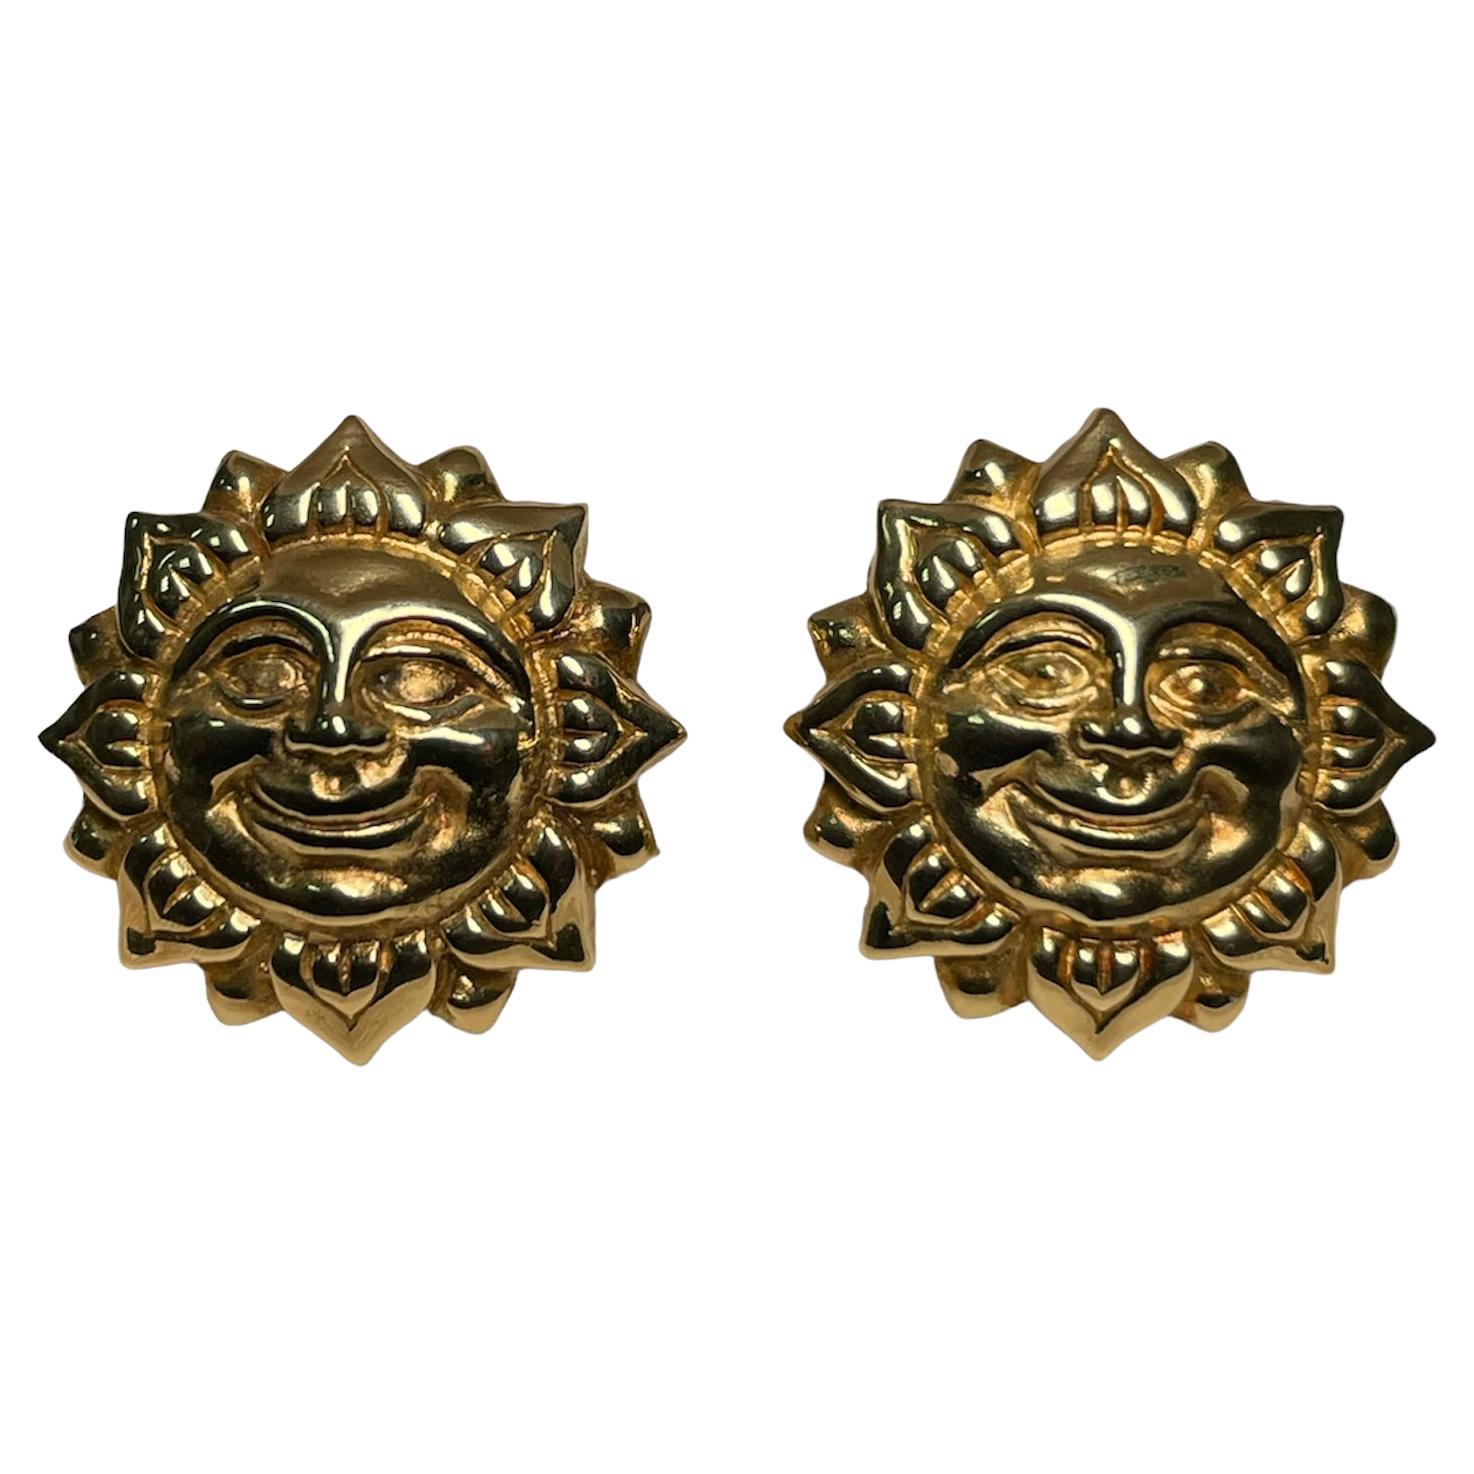 Rare 18k Yellow Gold Pair of Smiling Sun Face Cufflinks For Sale